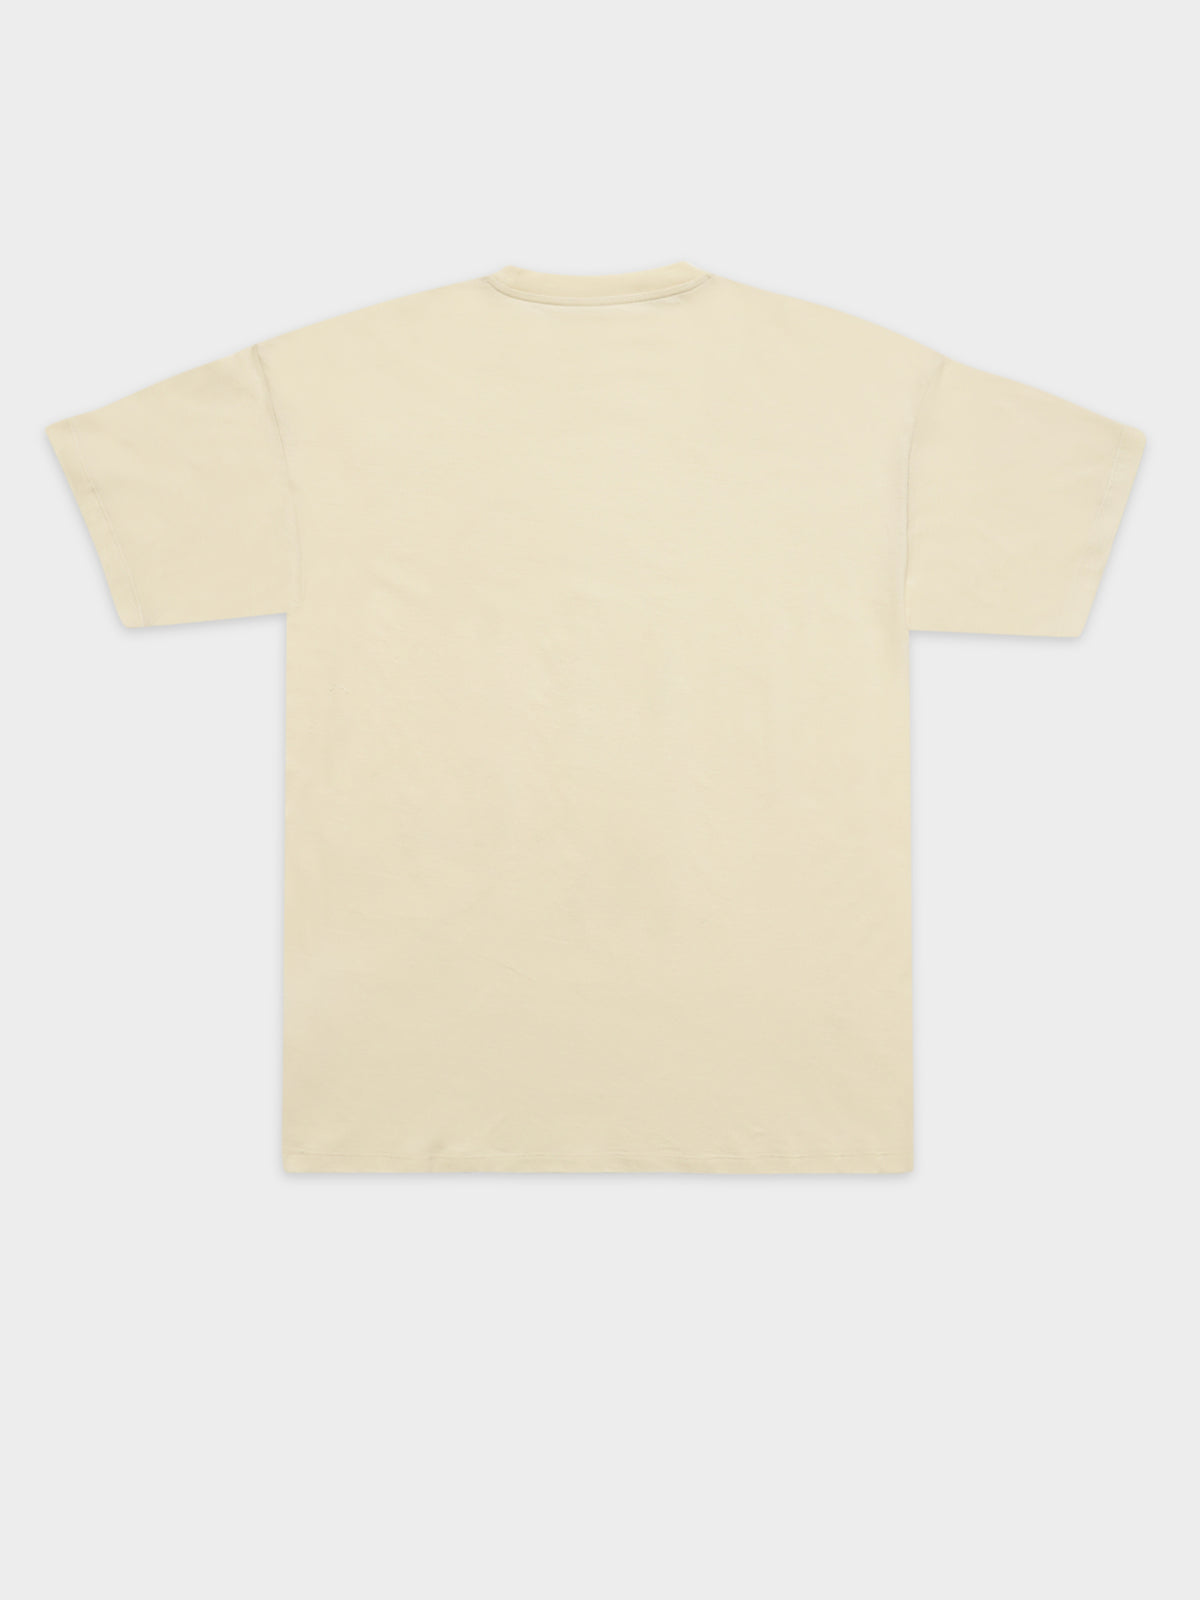 Short Sleeve Embroidery T-Shirt in Flour